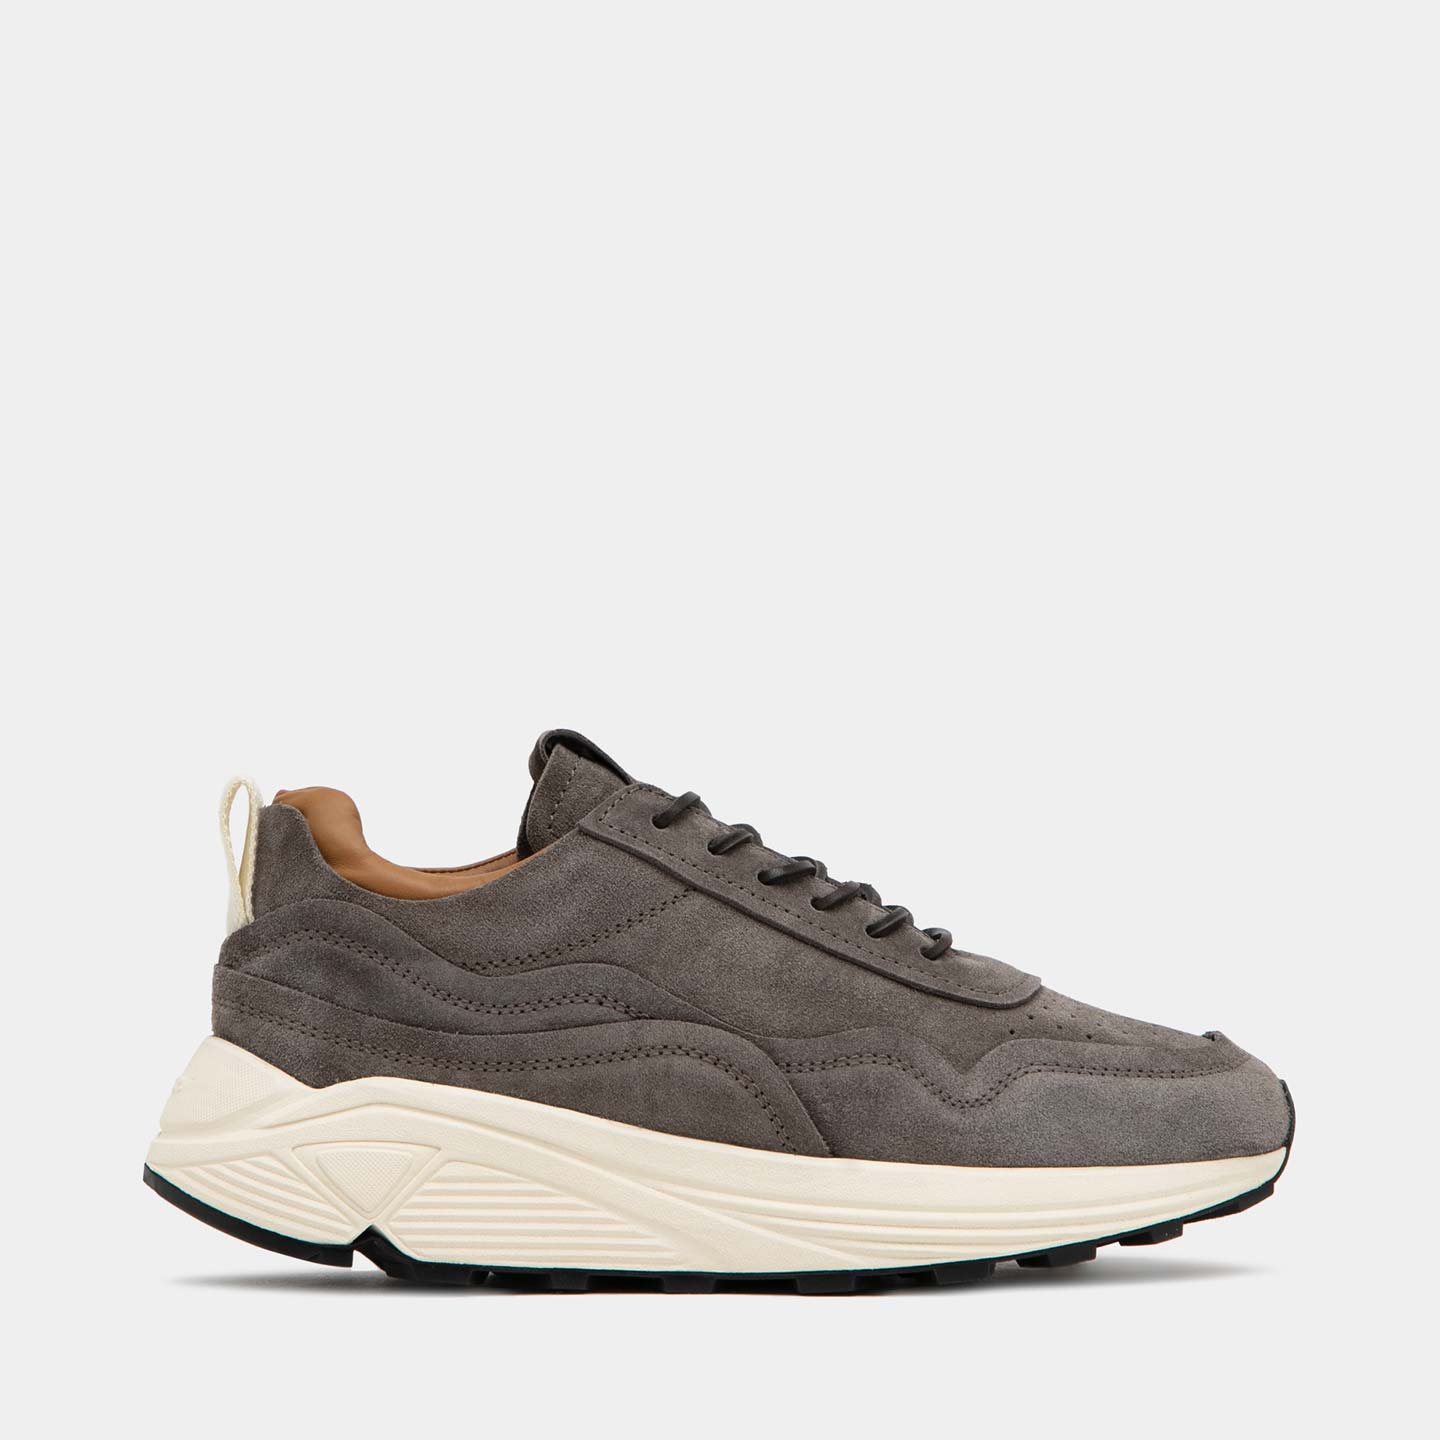 VINCI SNEAKERS IN GRAY SUEDE B10050GORH-UG1/21-TAUPE